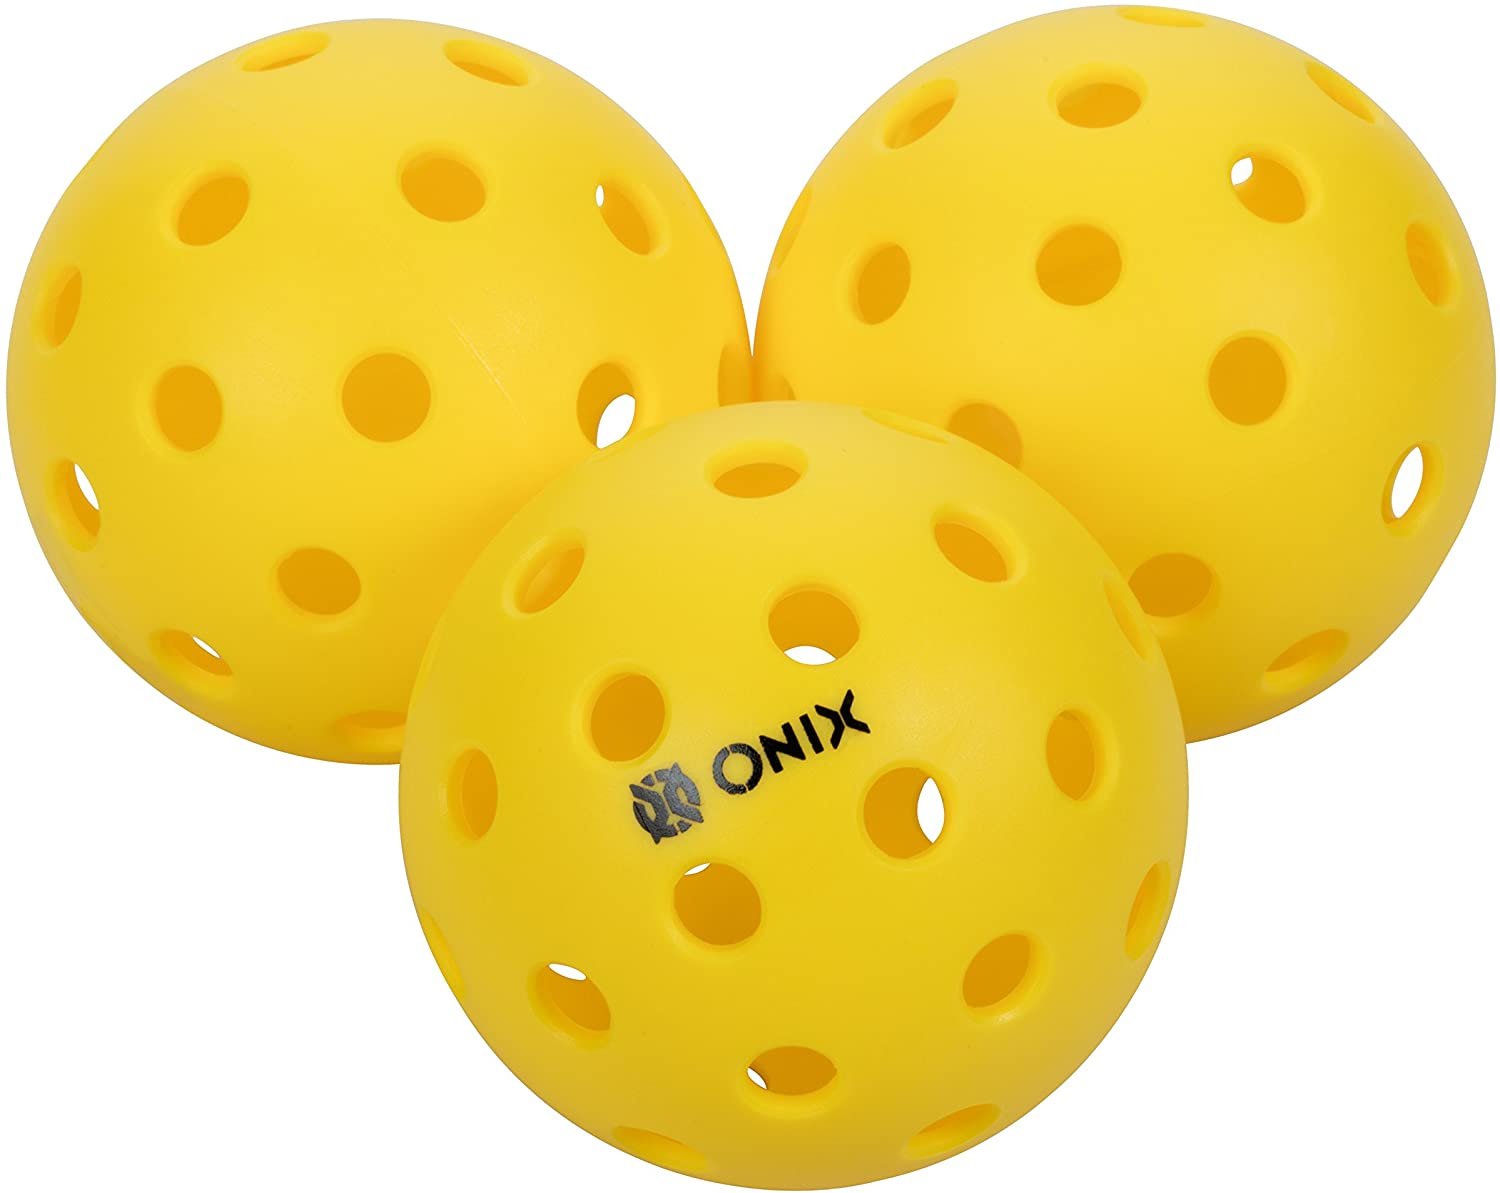 EasyTime Outdoor and Indoor Pickleball Balls Flight Trajectory is Stable Specifically Optimized Design Pickleball Balls High Elasticity Yellow for Indoor Ball and Orange for Outdoor Ball